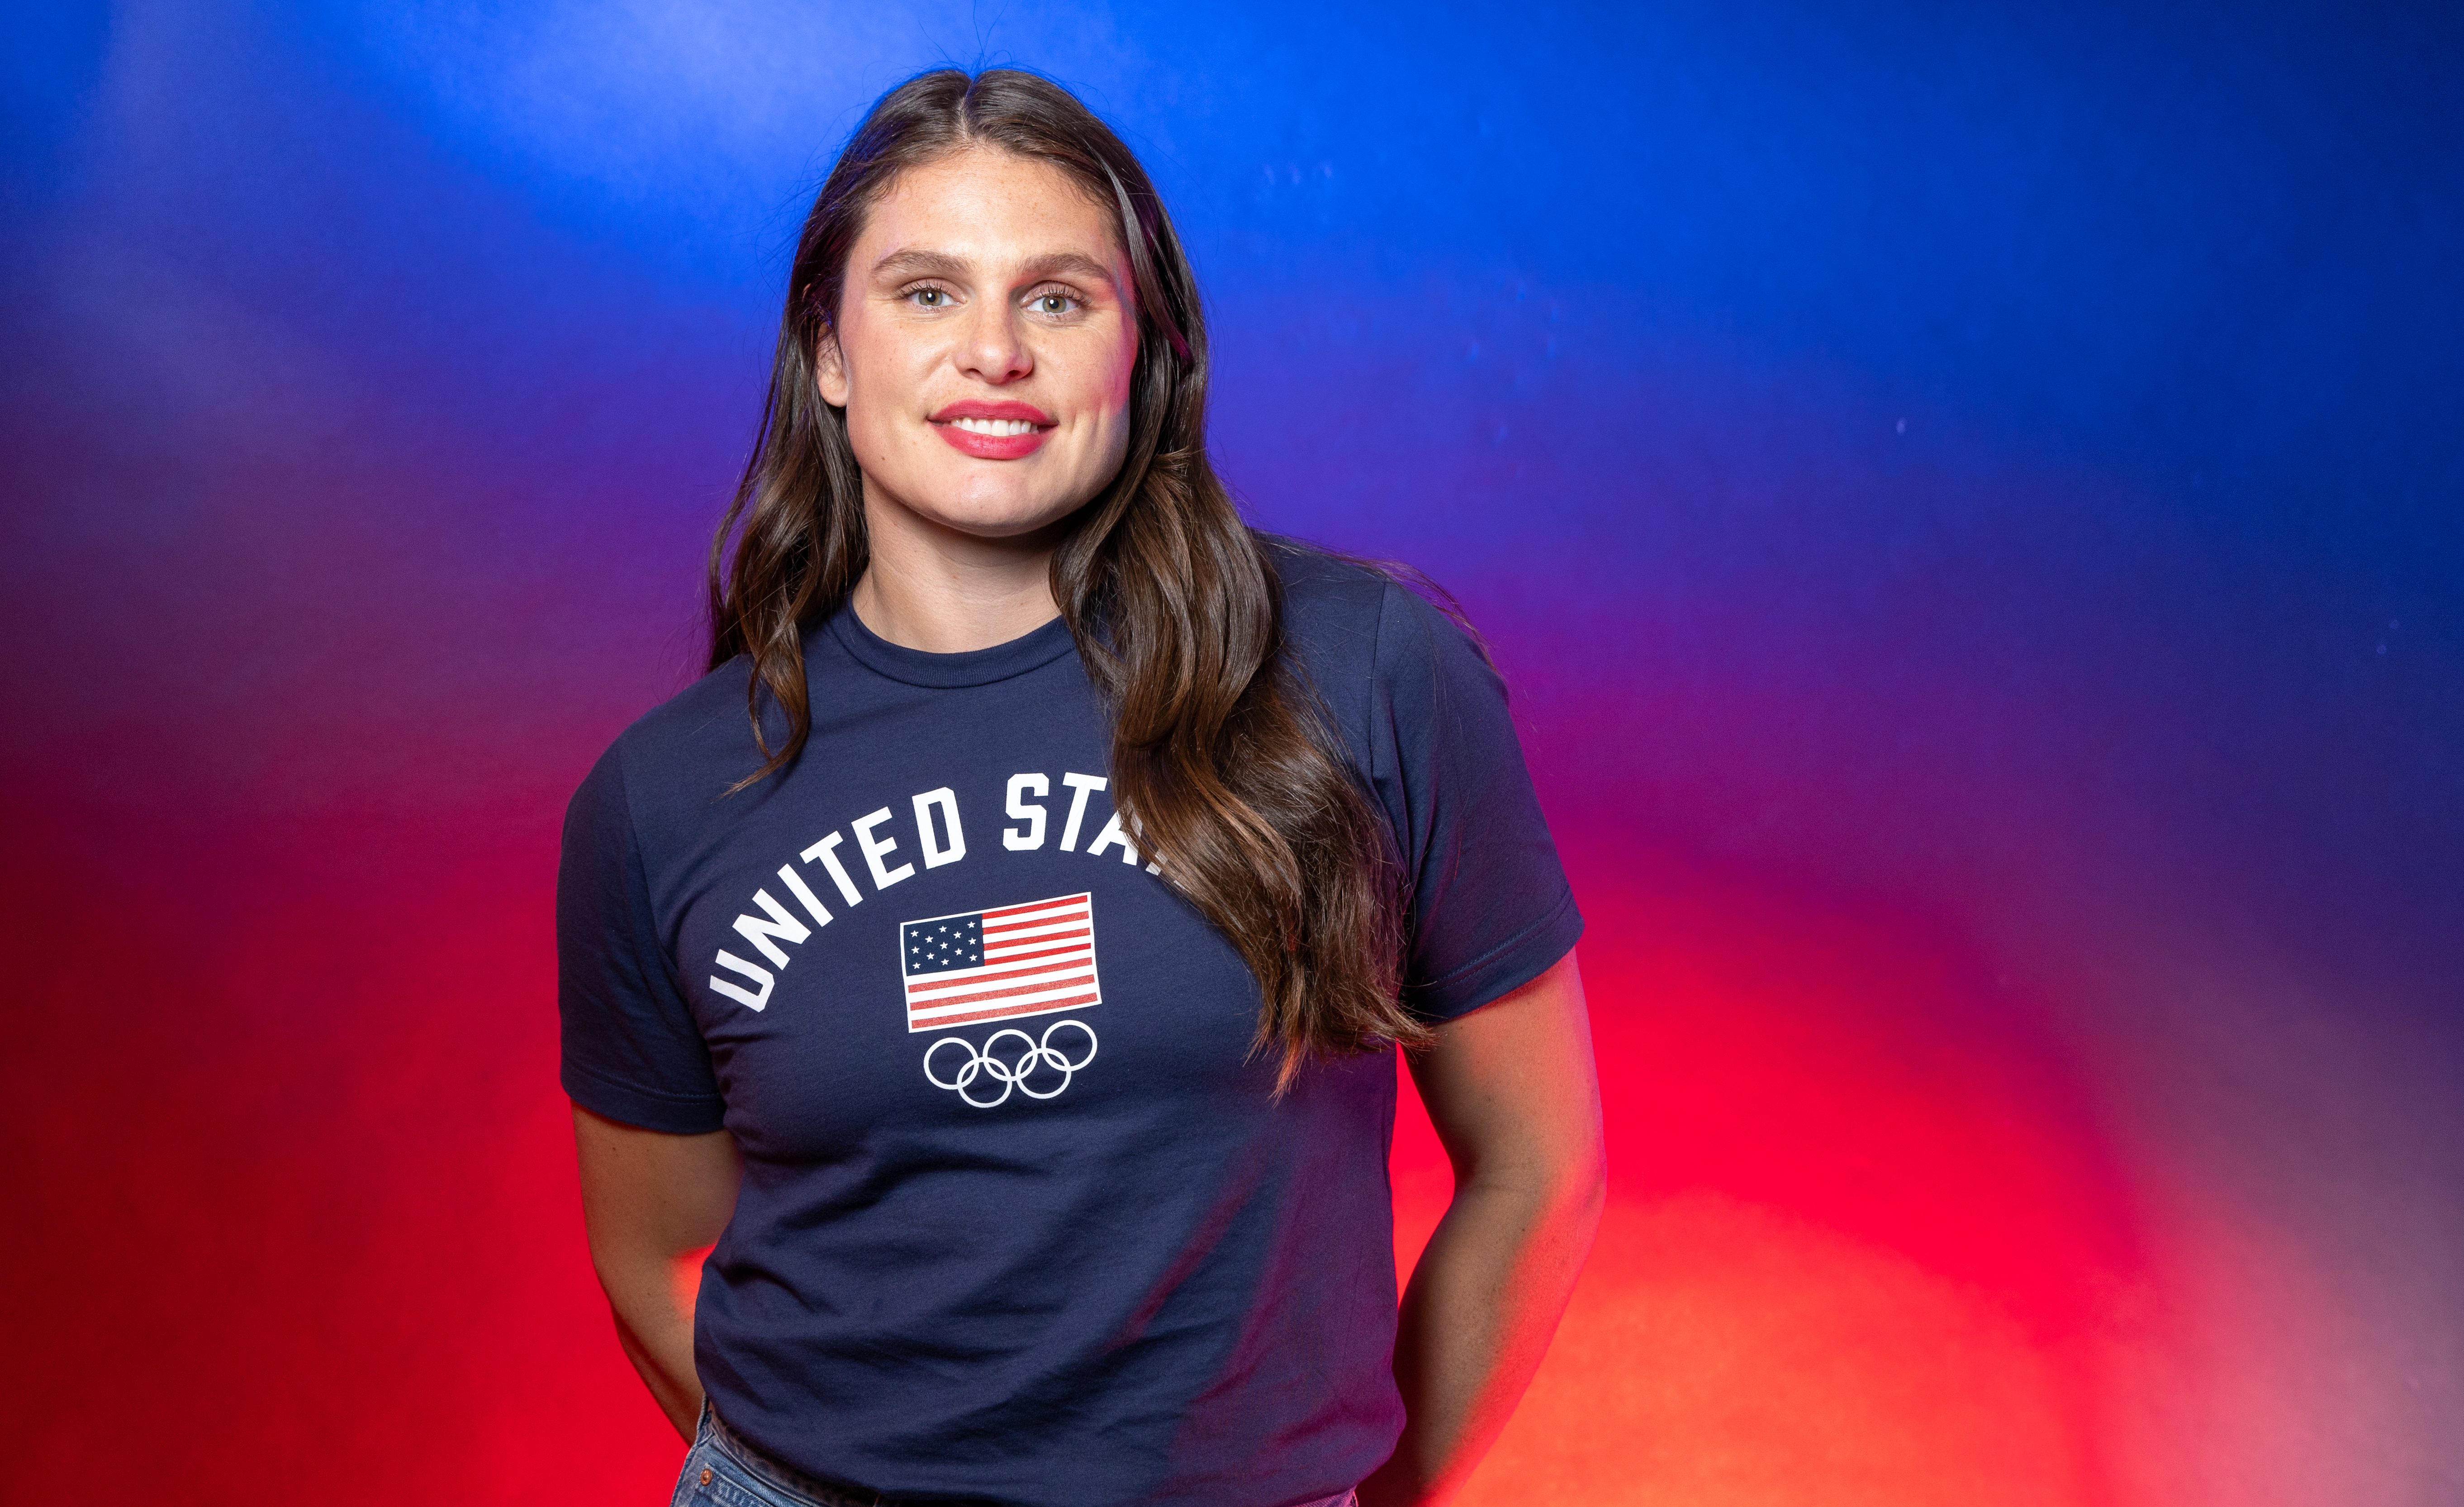 Who is Ilona Maher? Meet Team USA's breakout rugby star